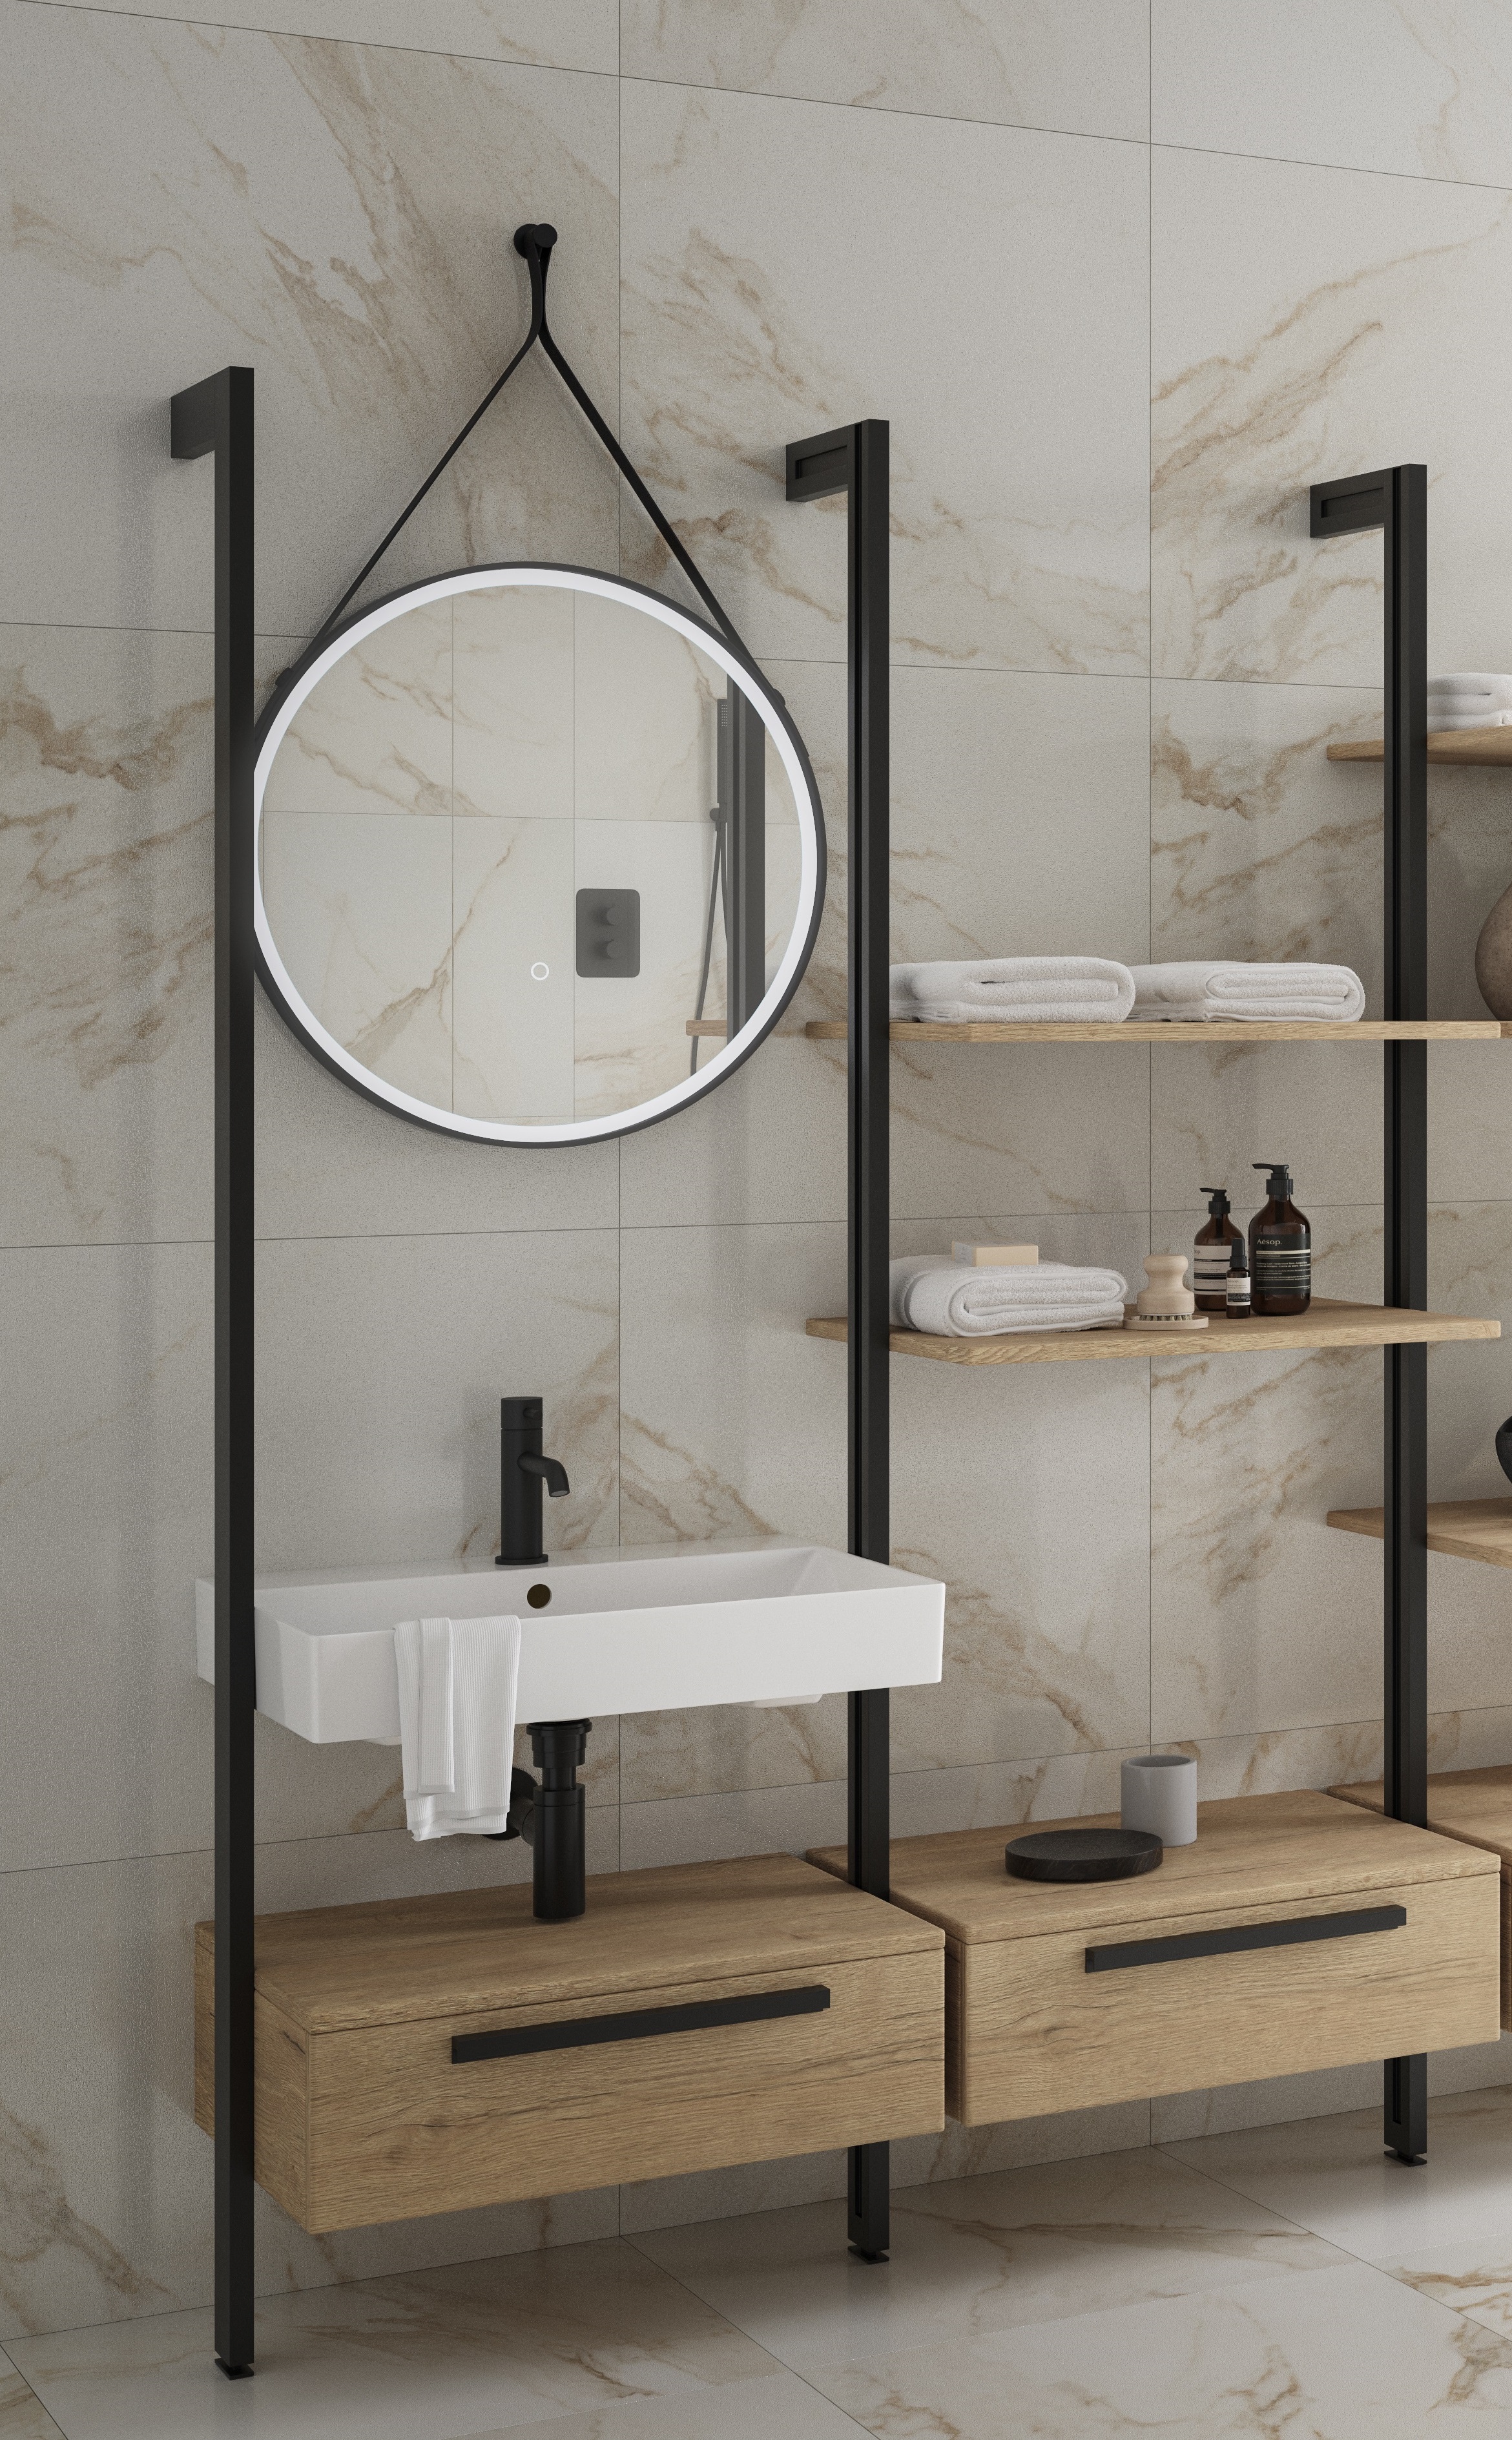 Wickes Rimini Wall System Vanity Unit Only with Shelves & White Basin - 1200mm